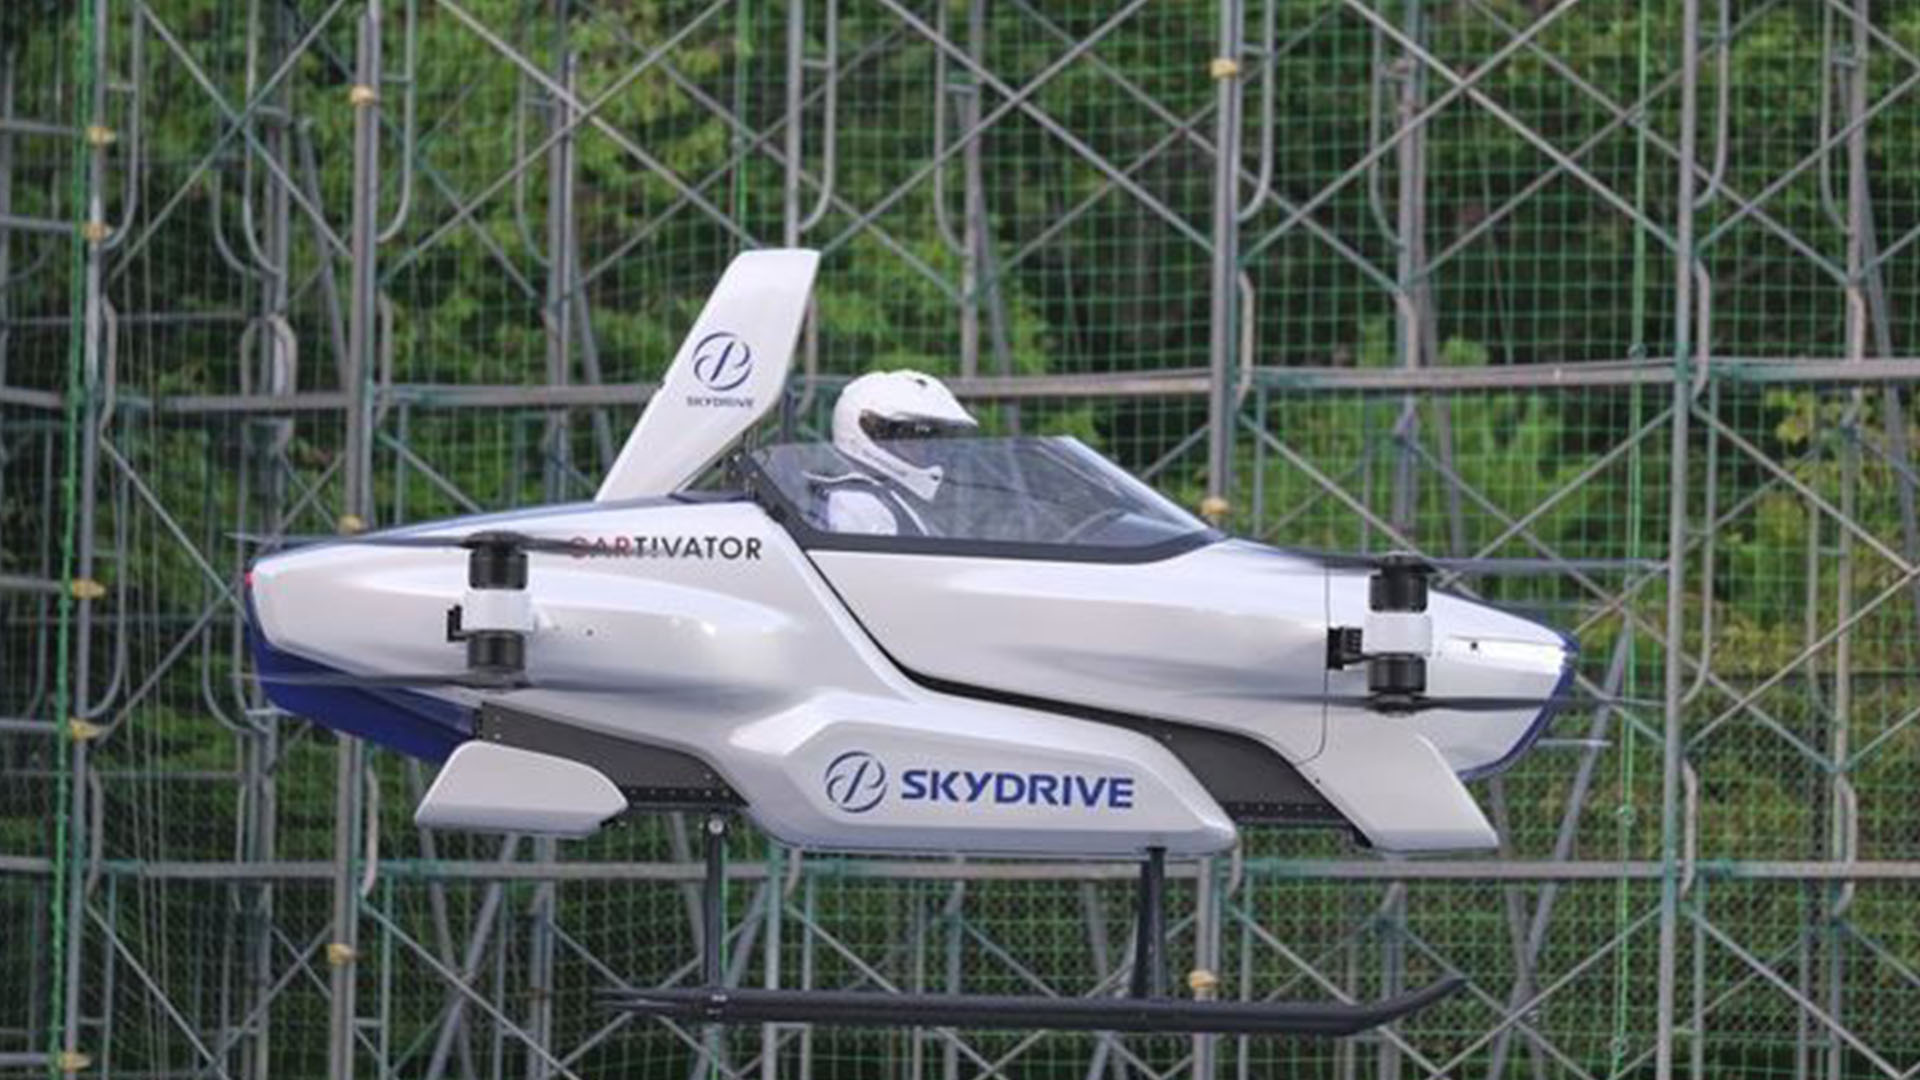 Japan's 'flying car' gets off the ground with a person aboard